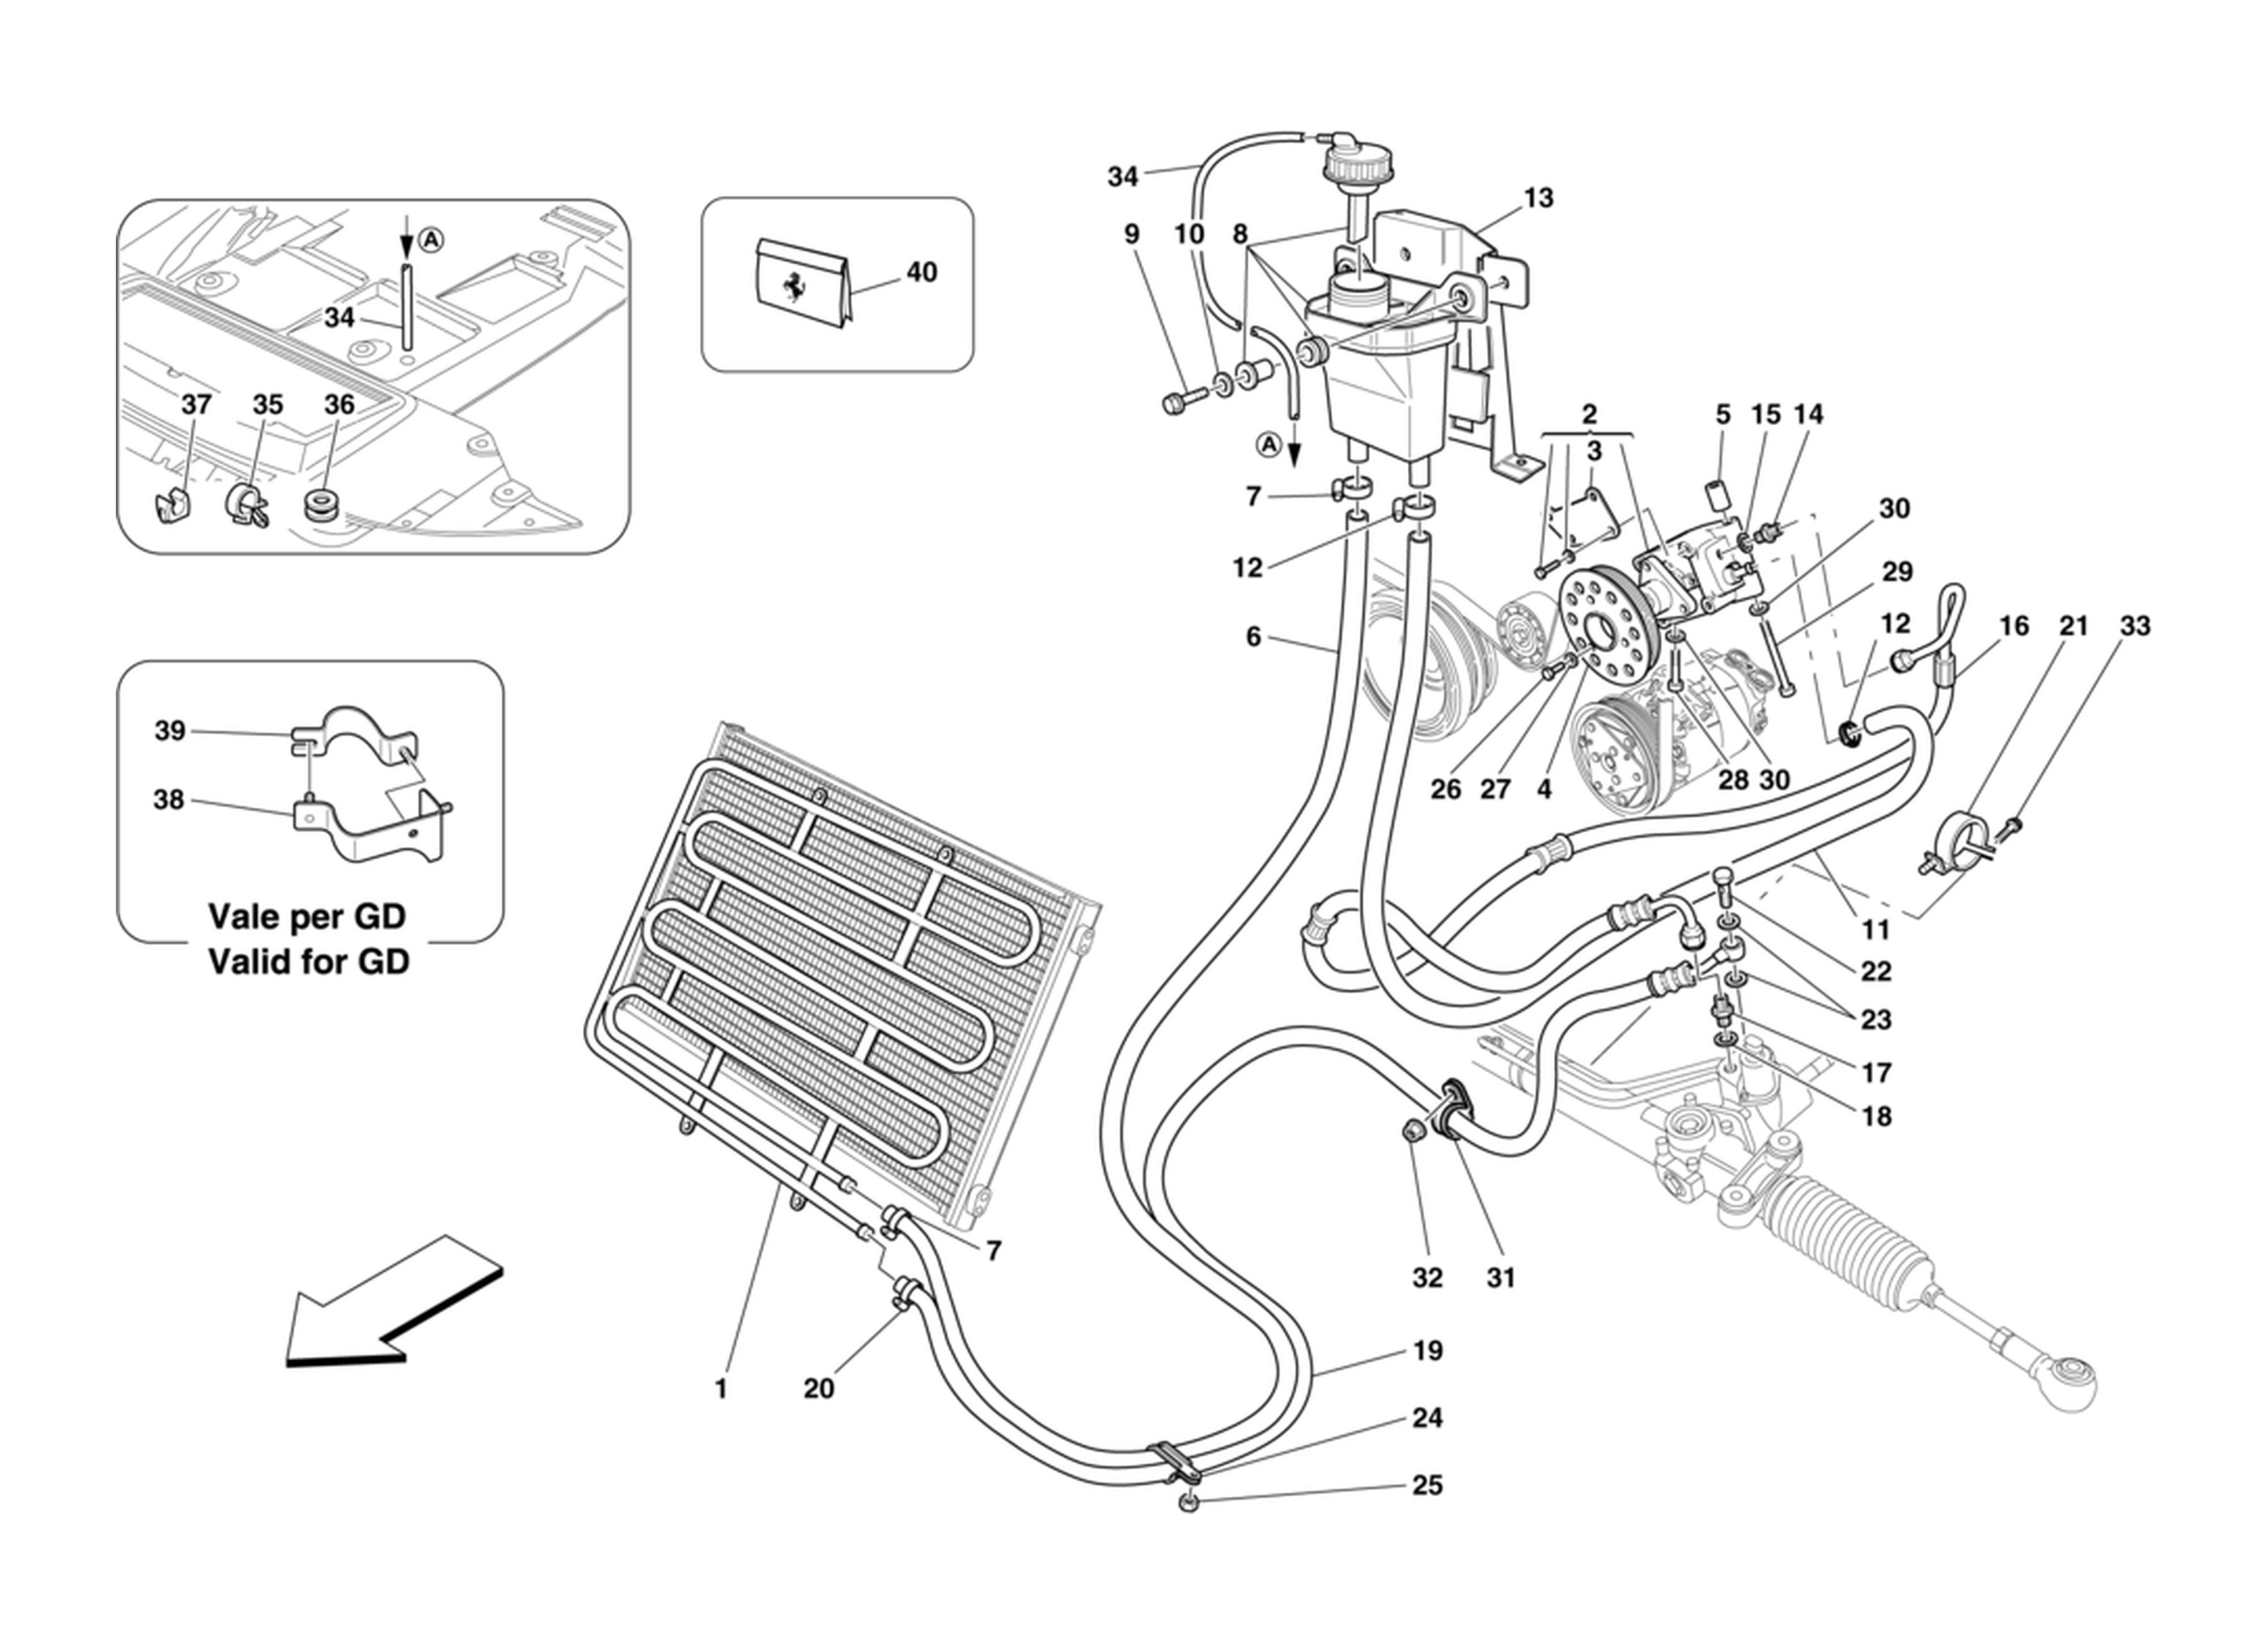 Schematic: Hydraulic Fluid Reservoir Pump And Coil For Power Steering